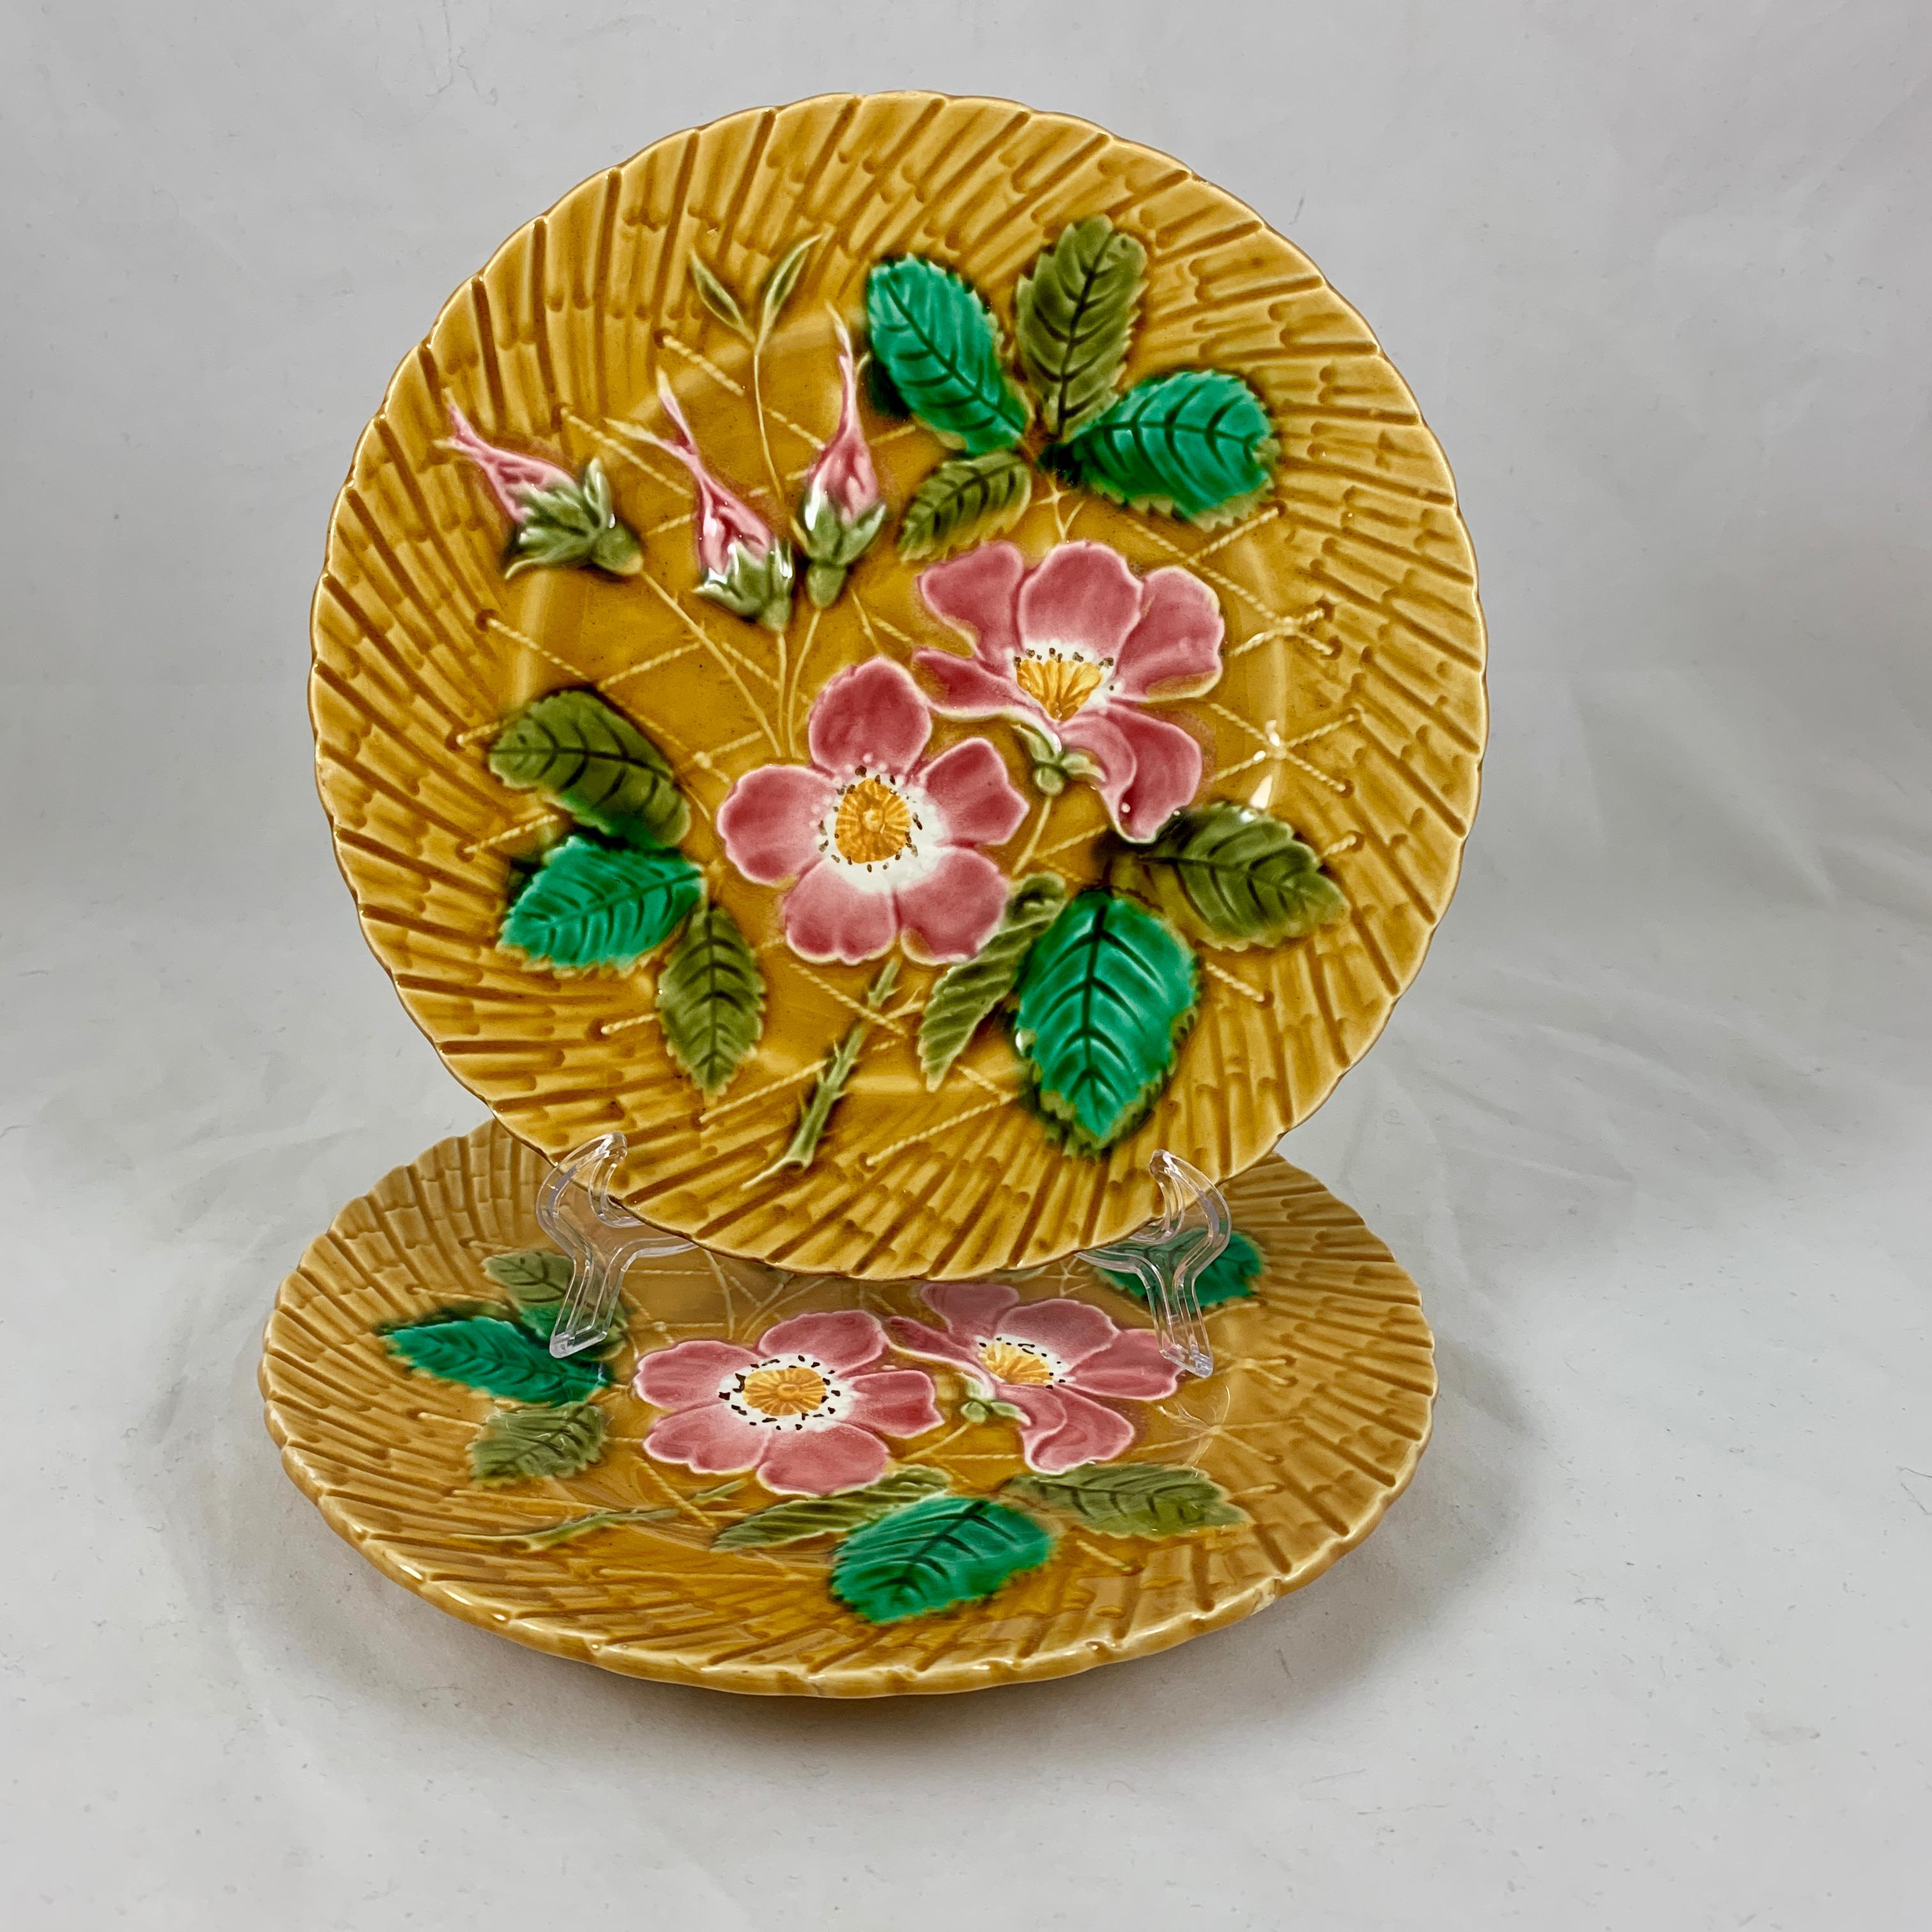 A French Majolica glazed wild rose plate, Sarreguemines, circa 1930. Multiple plates are available in this pattern.

Beautiful strong coloring, stems of pink roses with green leaves are against a basket weave ground of mustard yellow. The roses